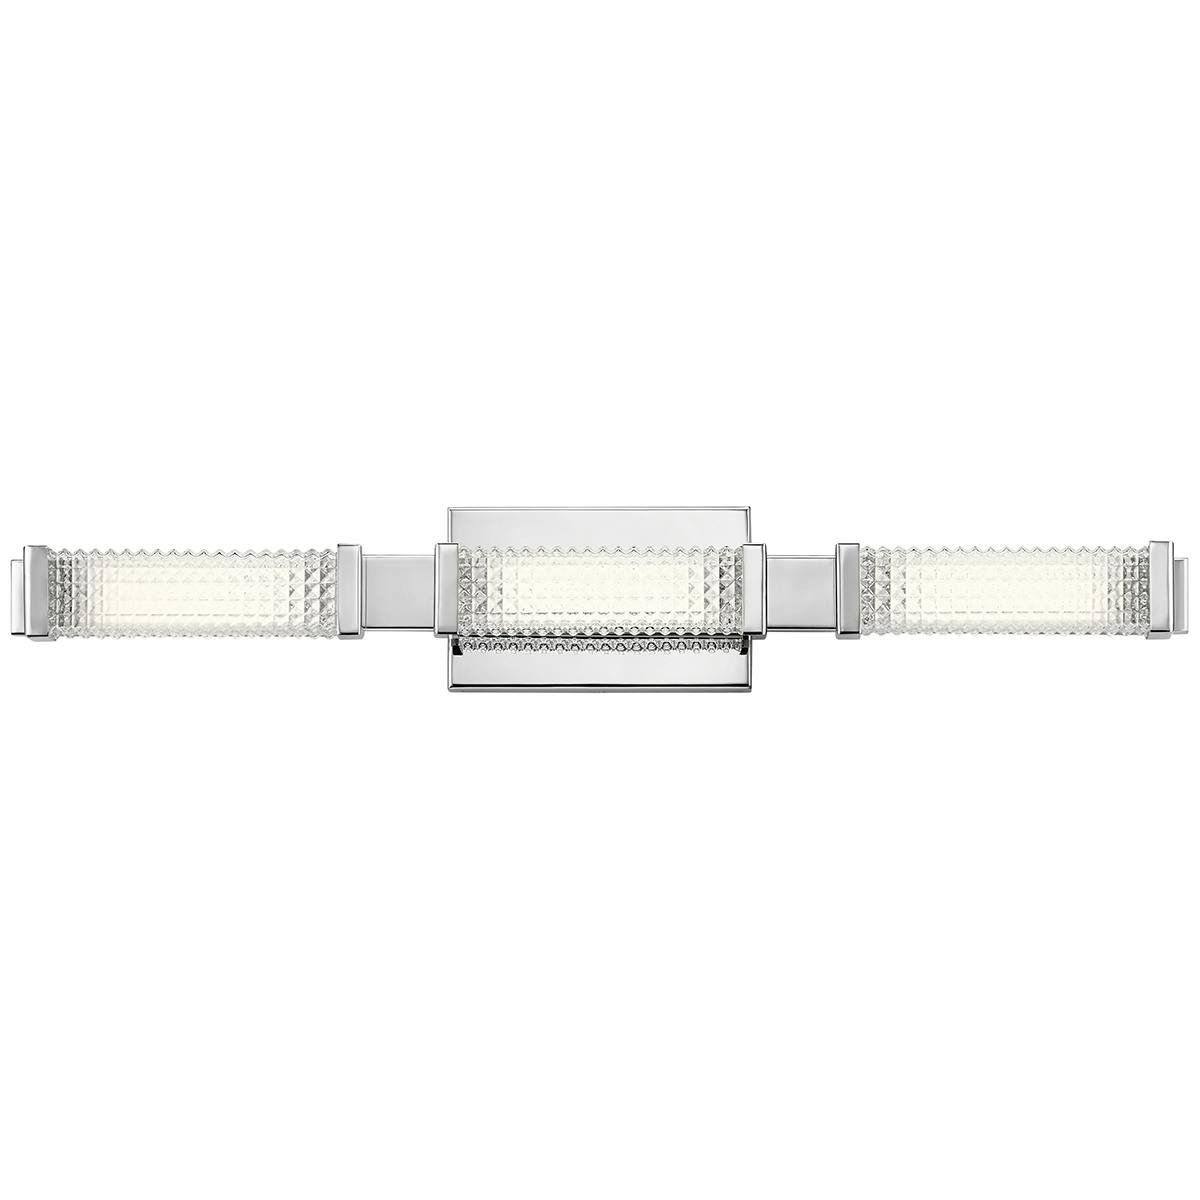 Front view of the Ammiras 3000K 3 Light Vanity Light Chrome on a white background